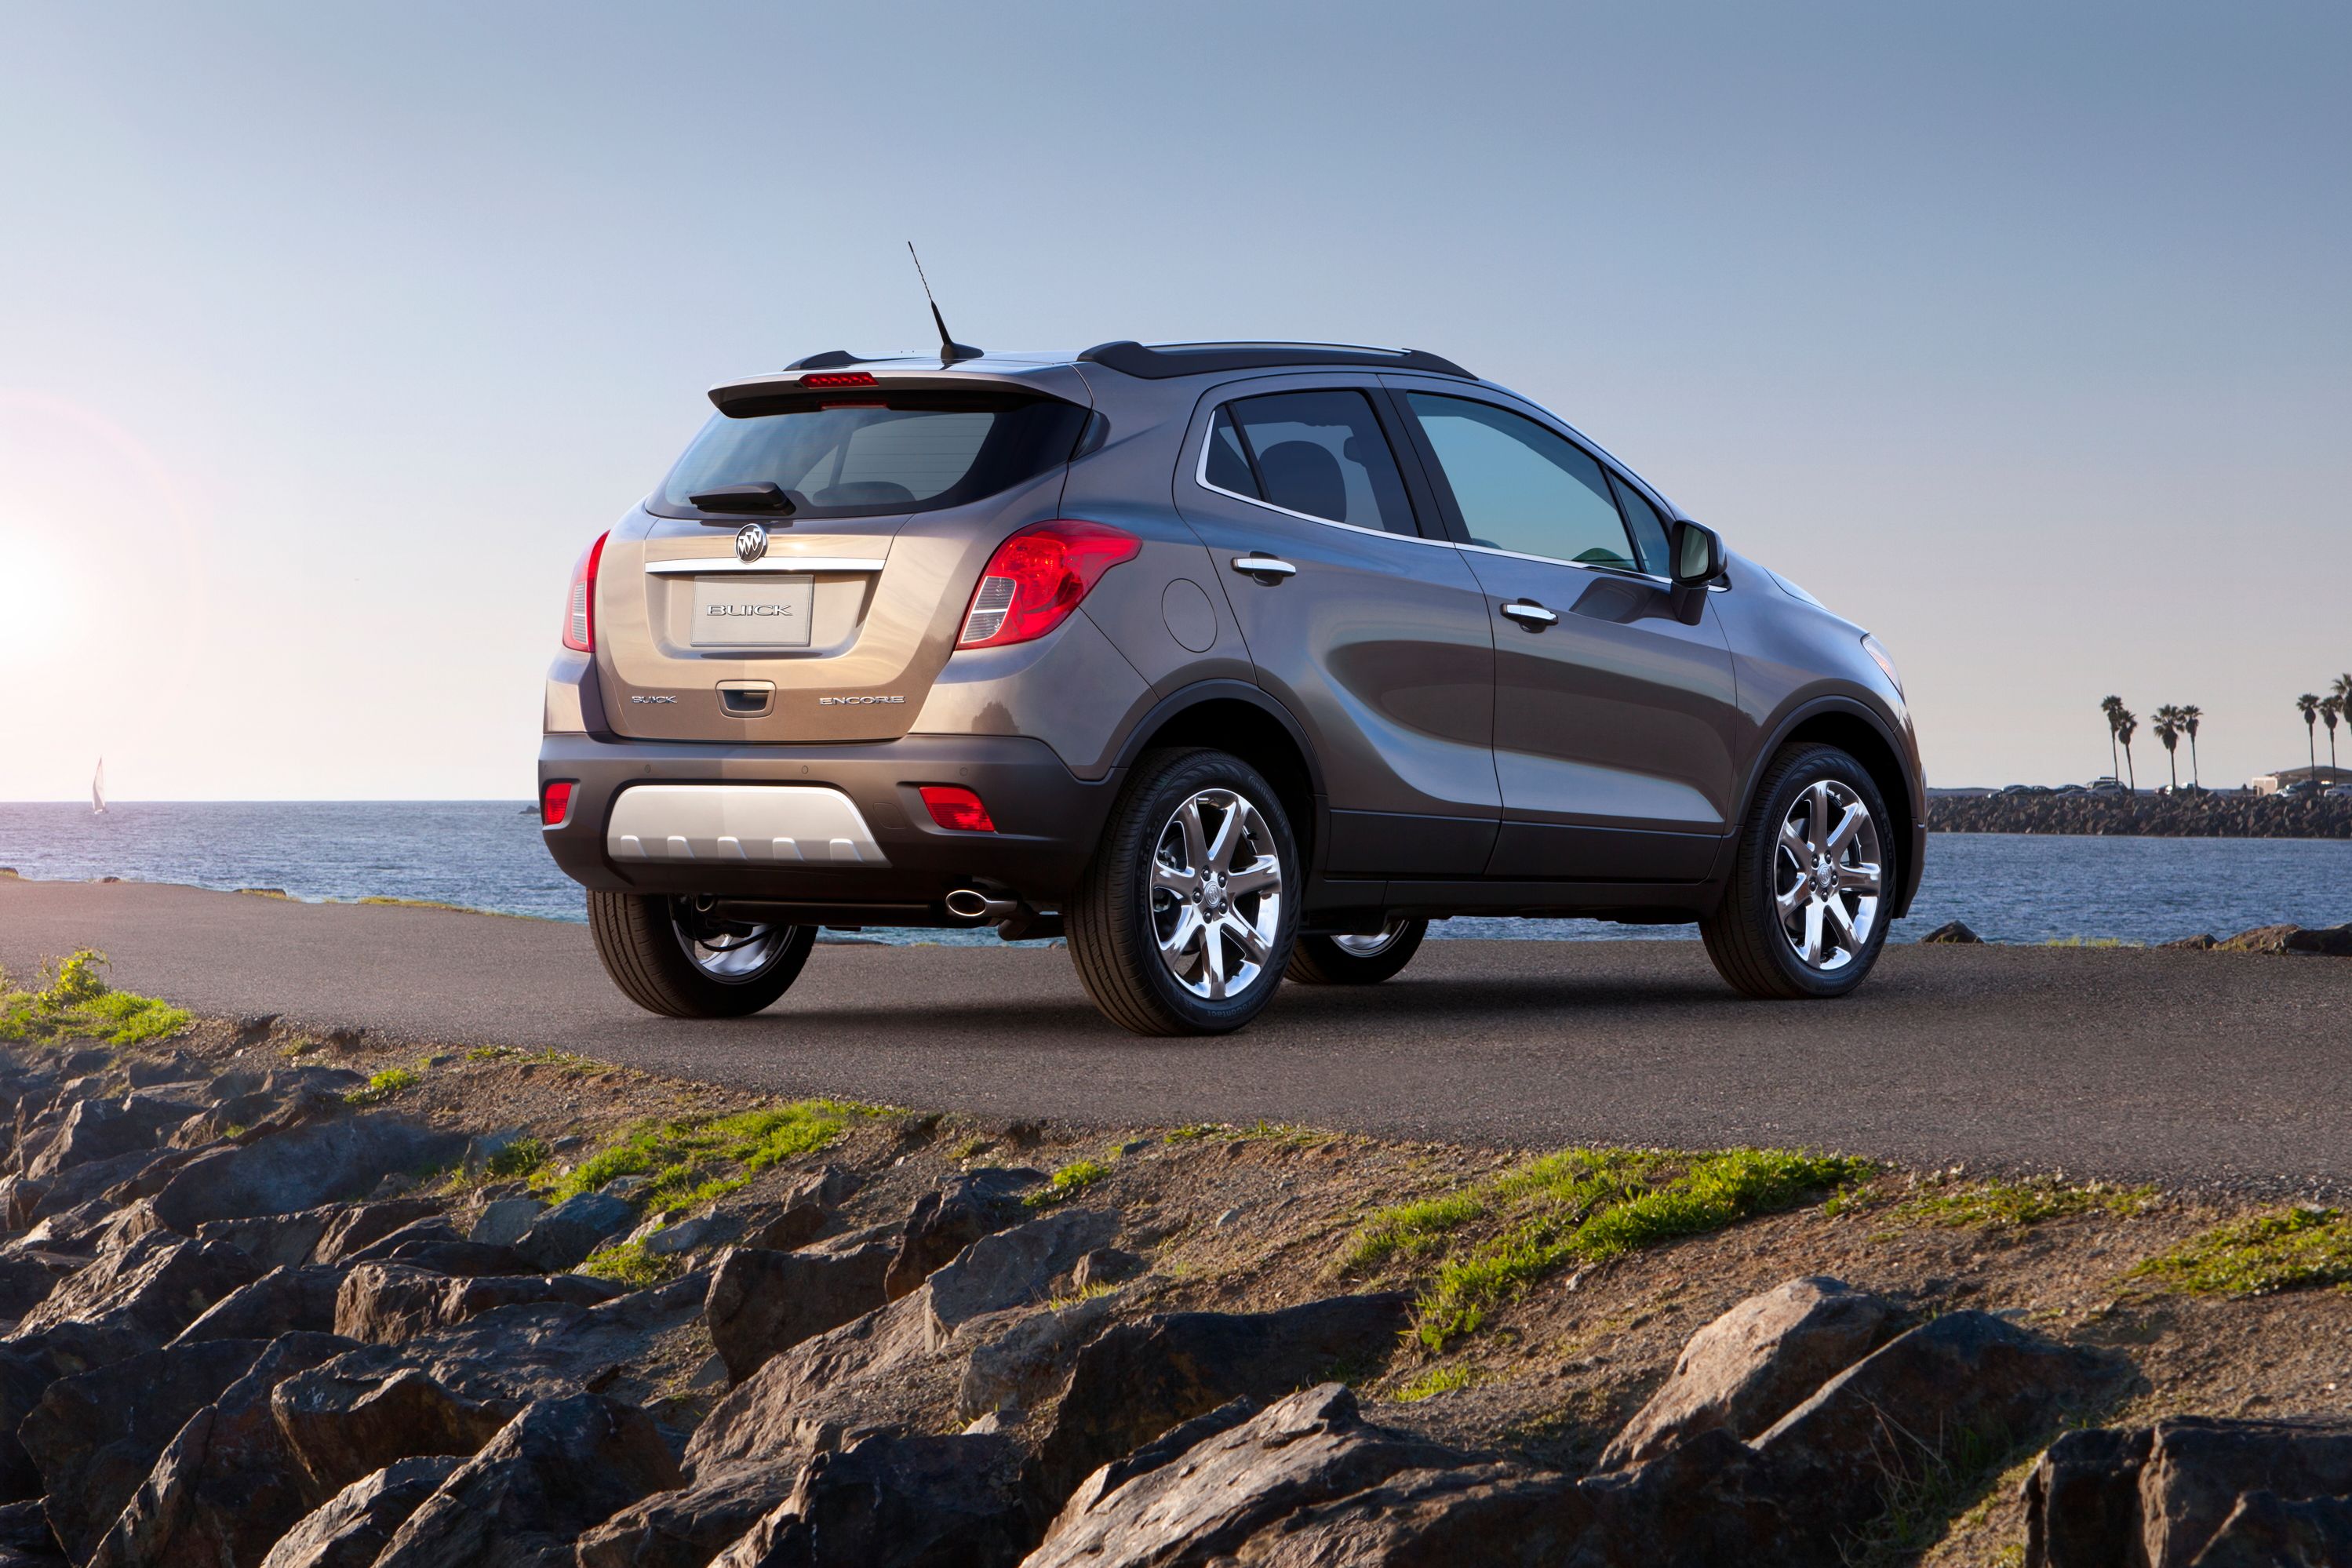 The first generation of the Buick Encore from 2013.